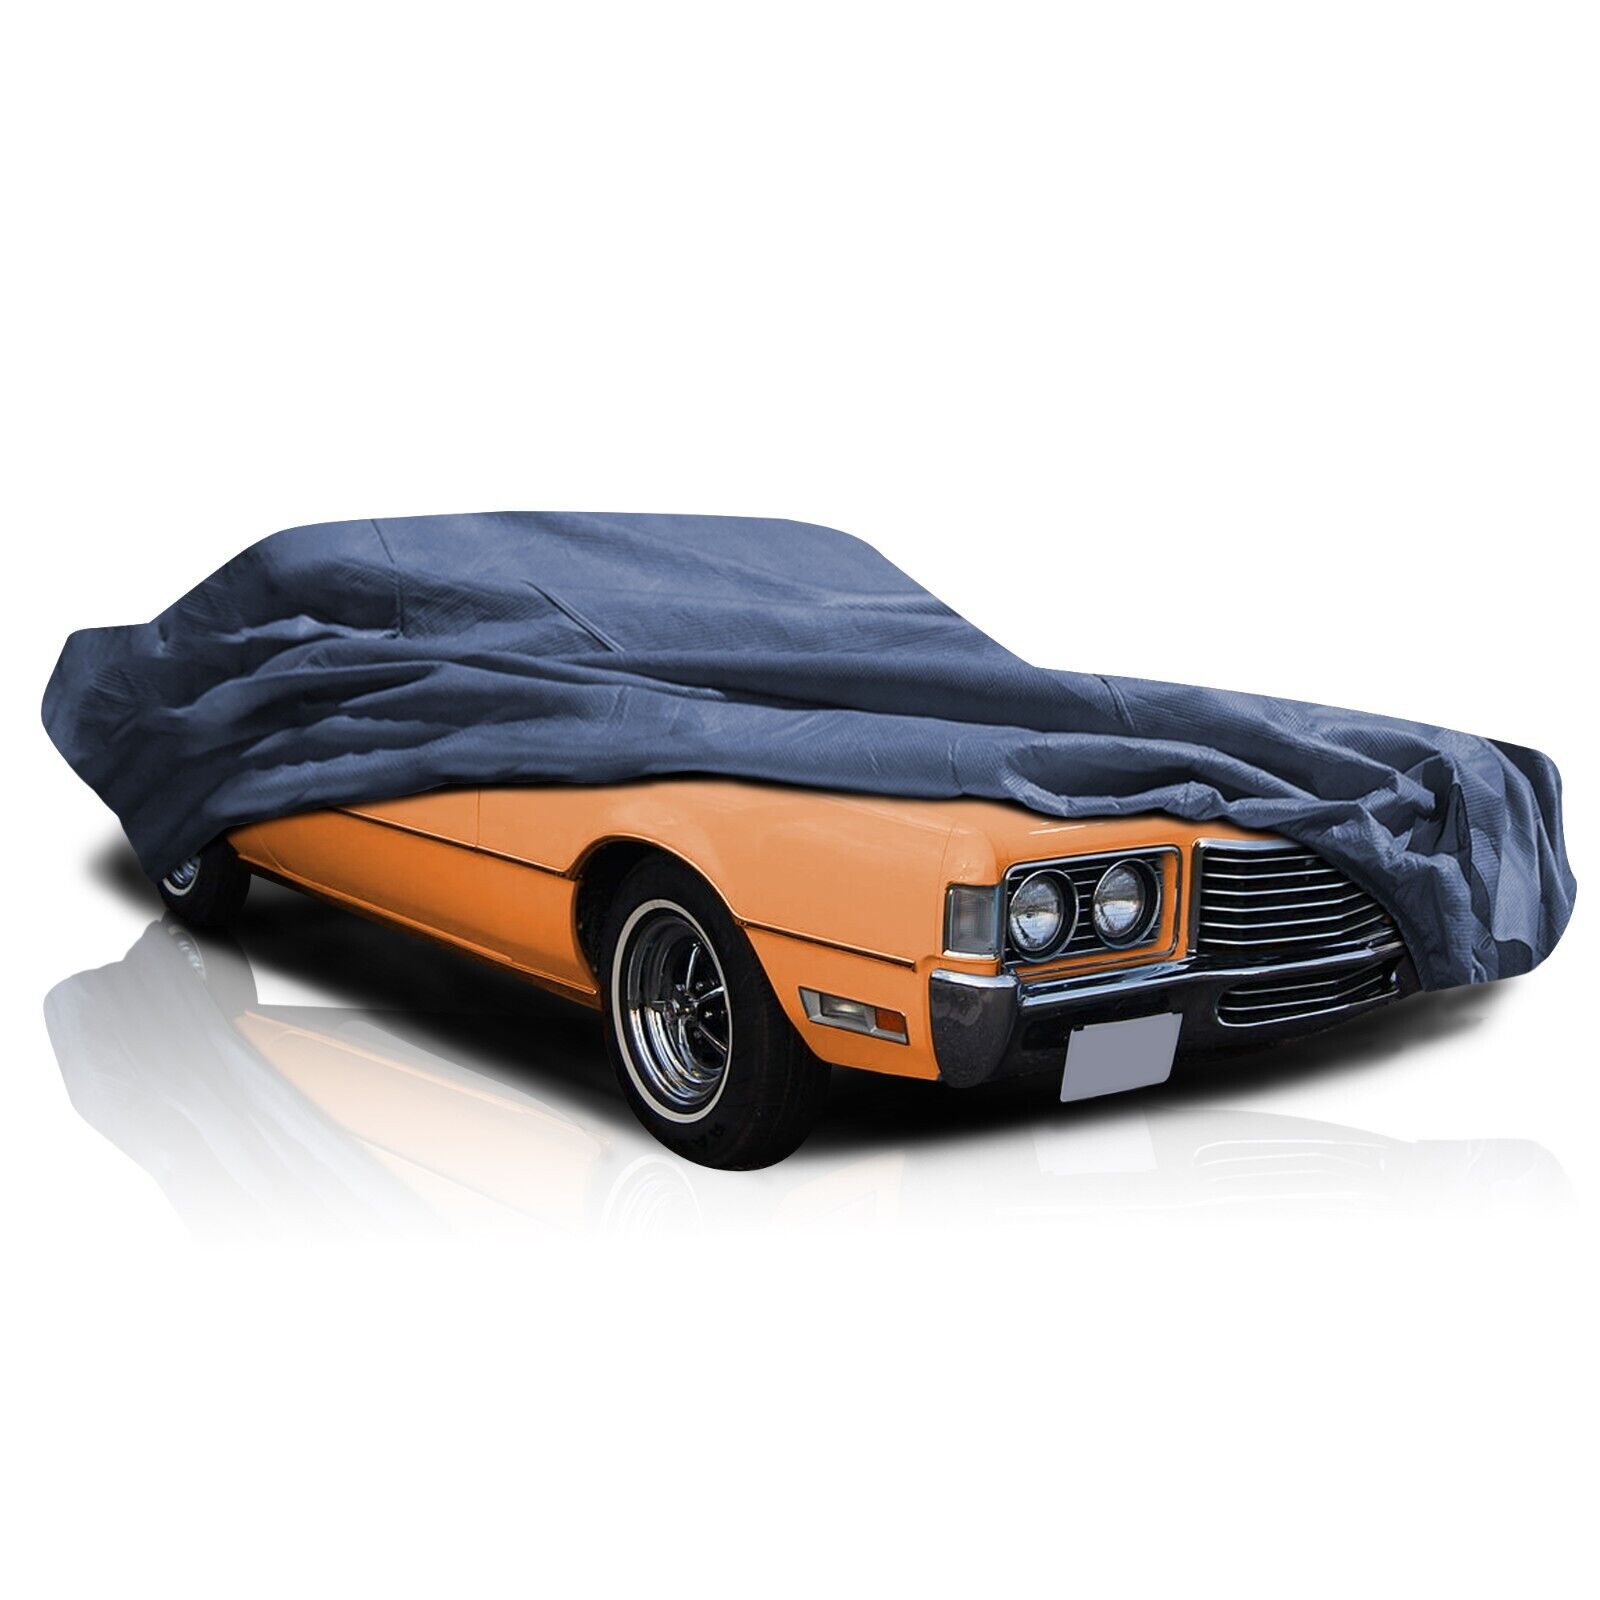 [CCT] 4 Layer Weather/Waterproof Full Car Cover For Ford Thunderbird 1955-2005